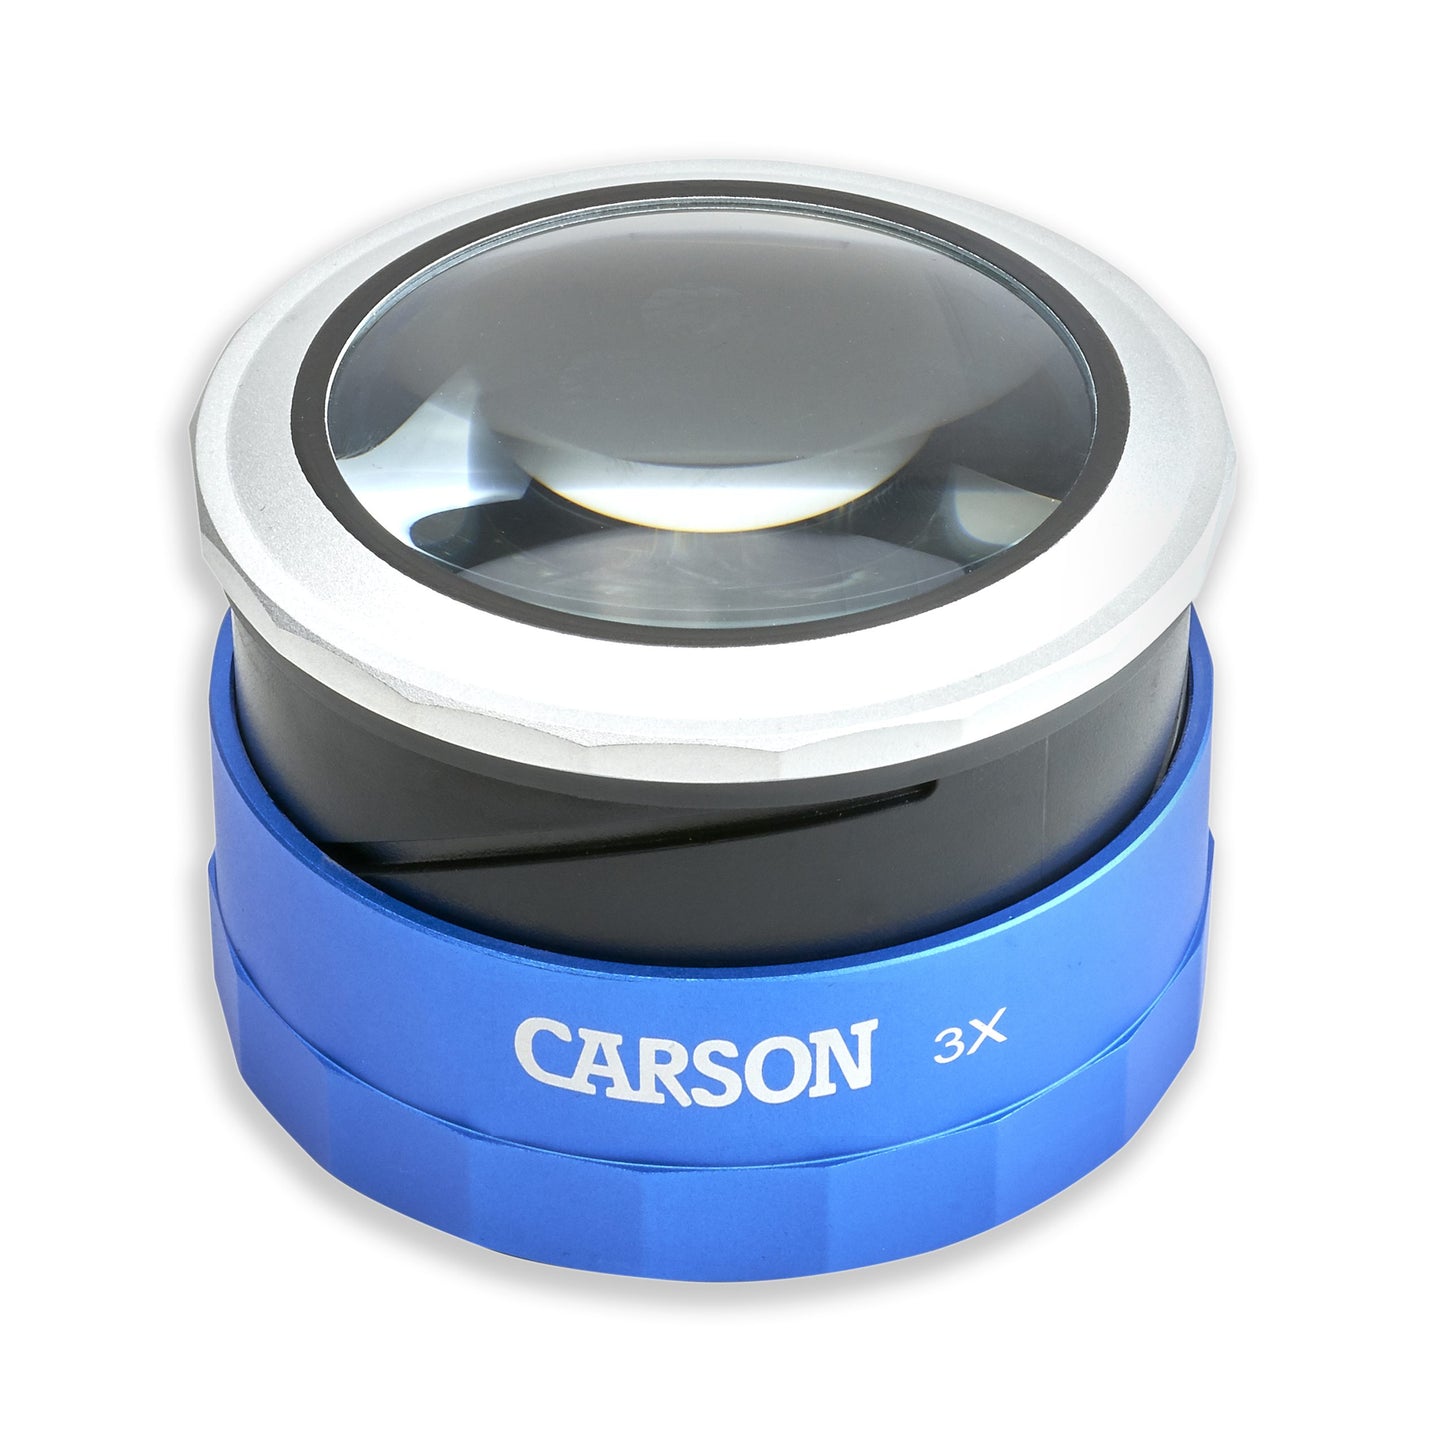 Carson MagniTouch 3x Power Touch Activated LED Lighted Stand Loupe Magnifier, Focusable Glass Lens MT-33